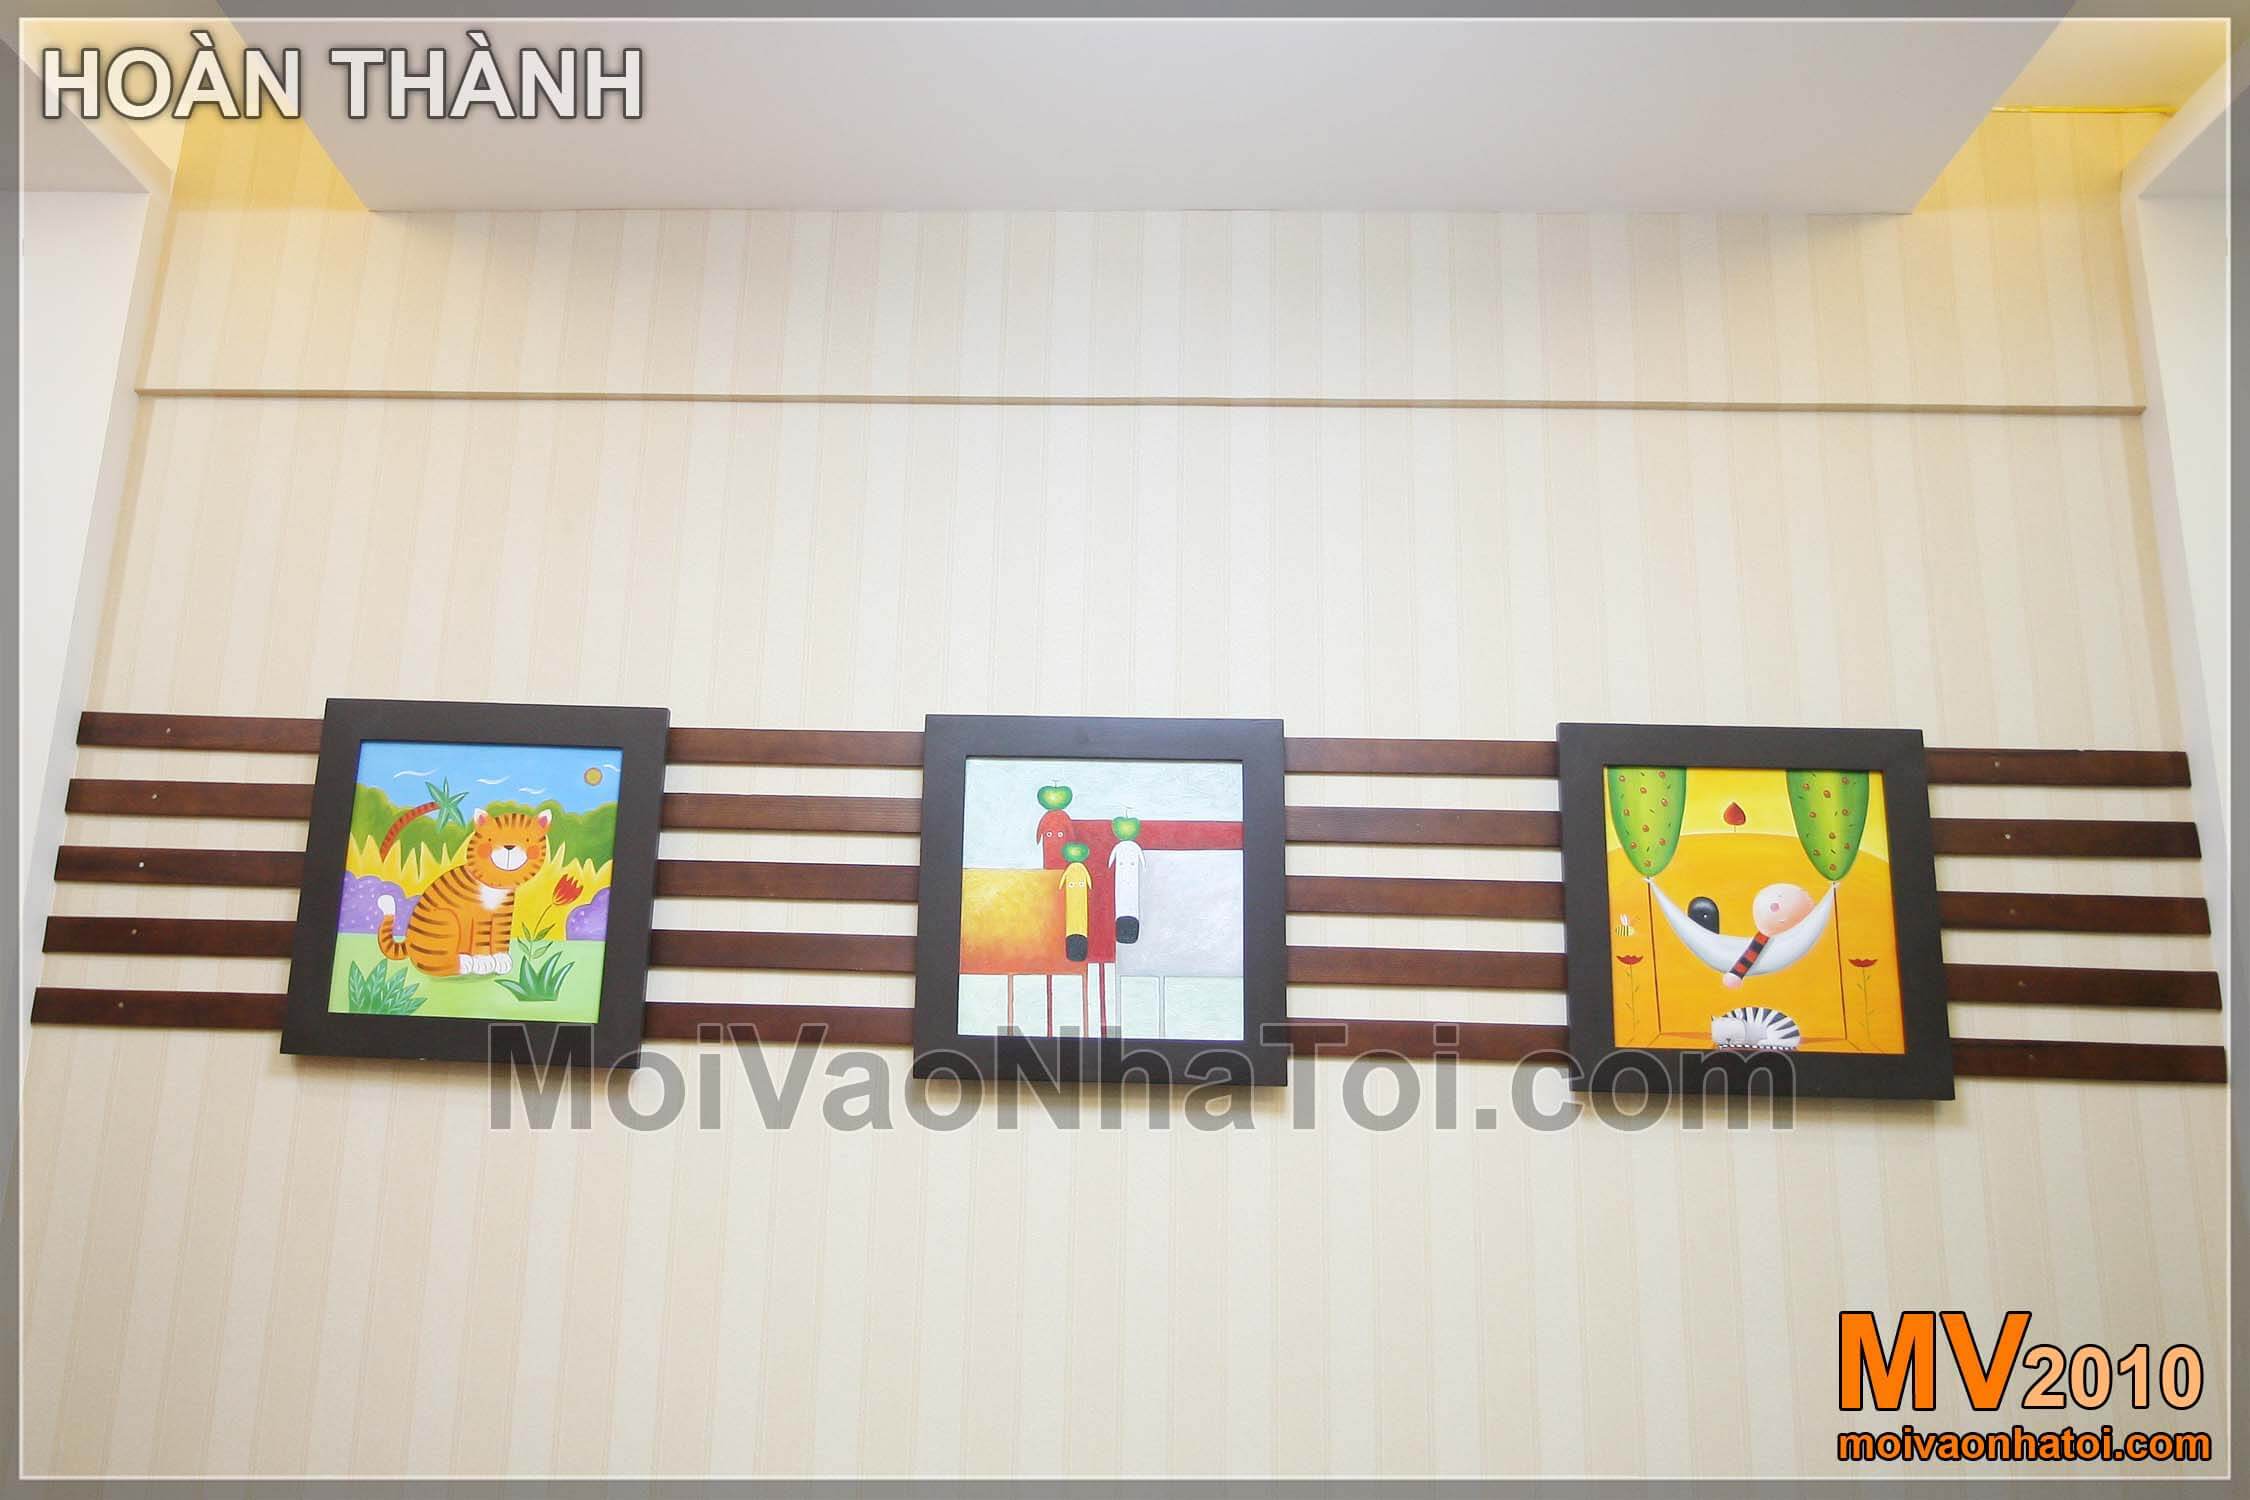 Viet Hung living room decoration painting